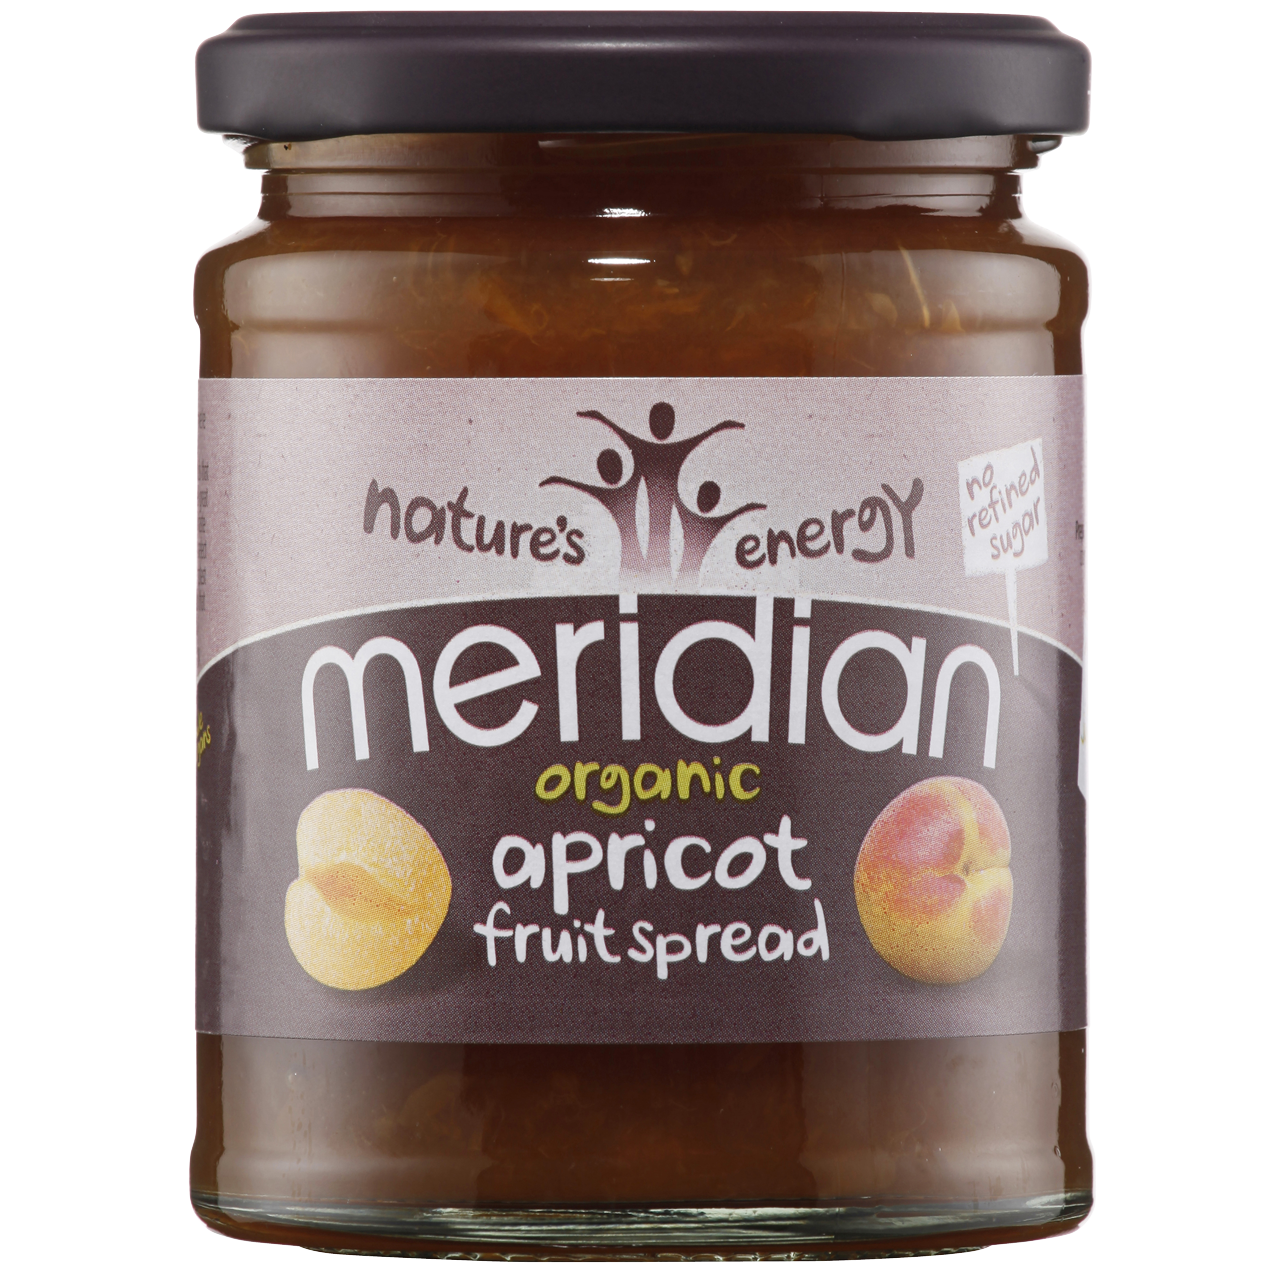 Meridian Organic Apricot Fruit Spread 284g - Just Natural